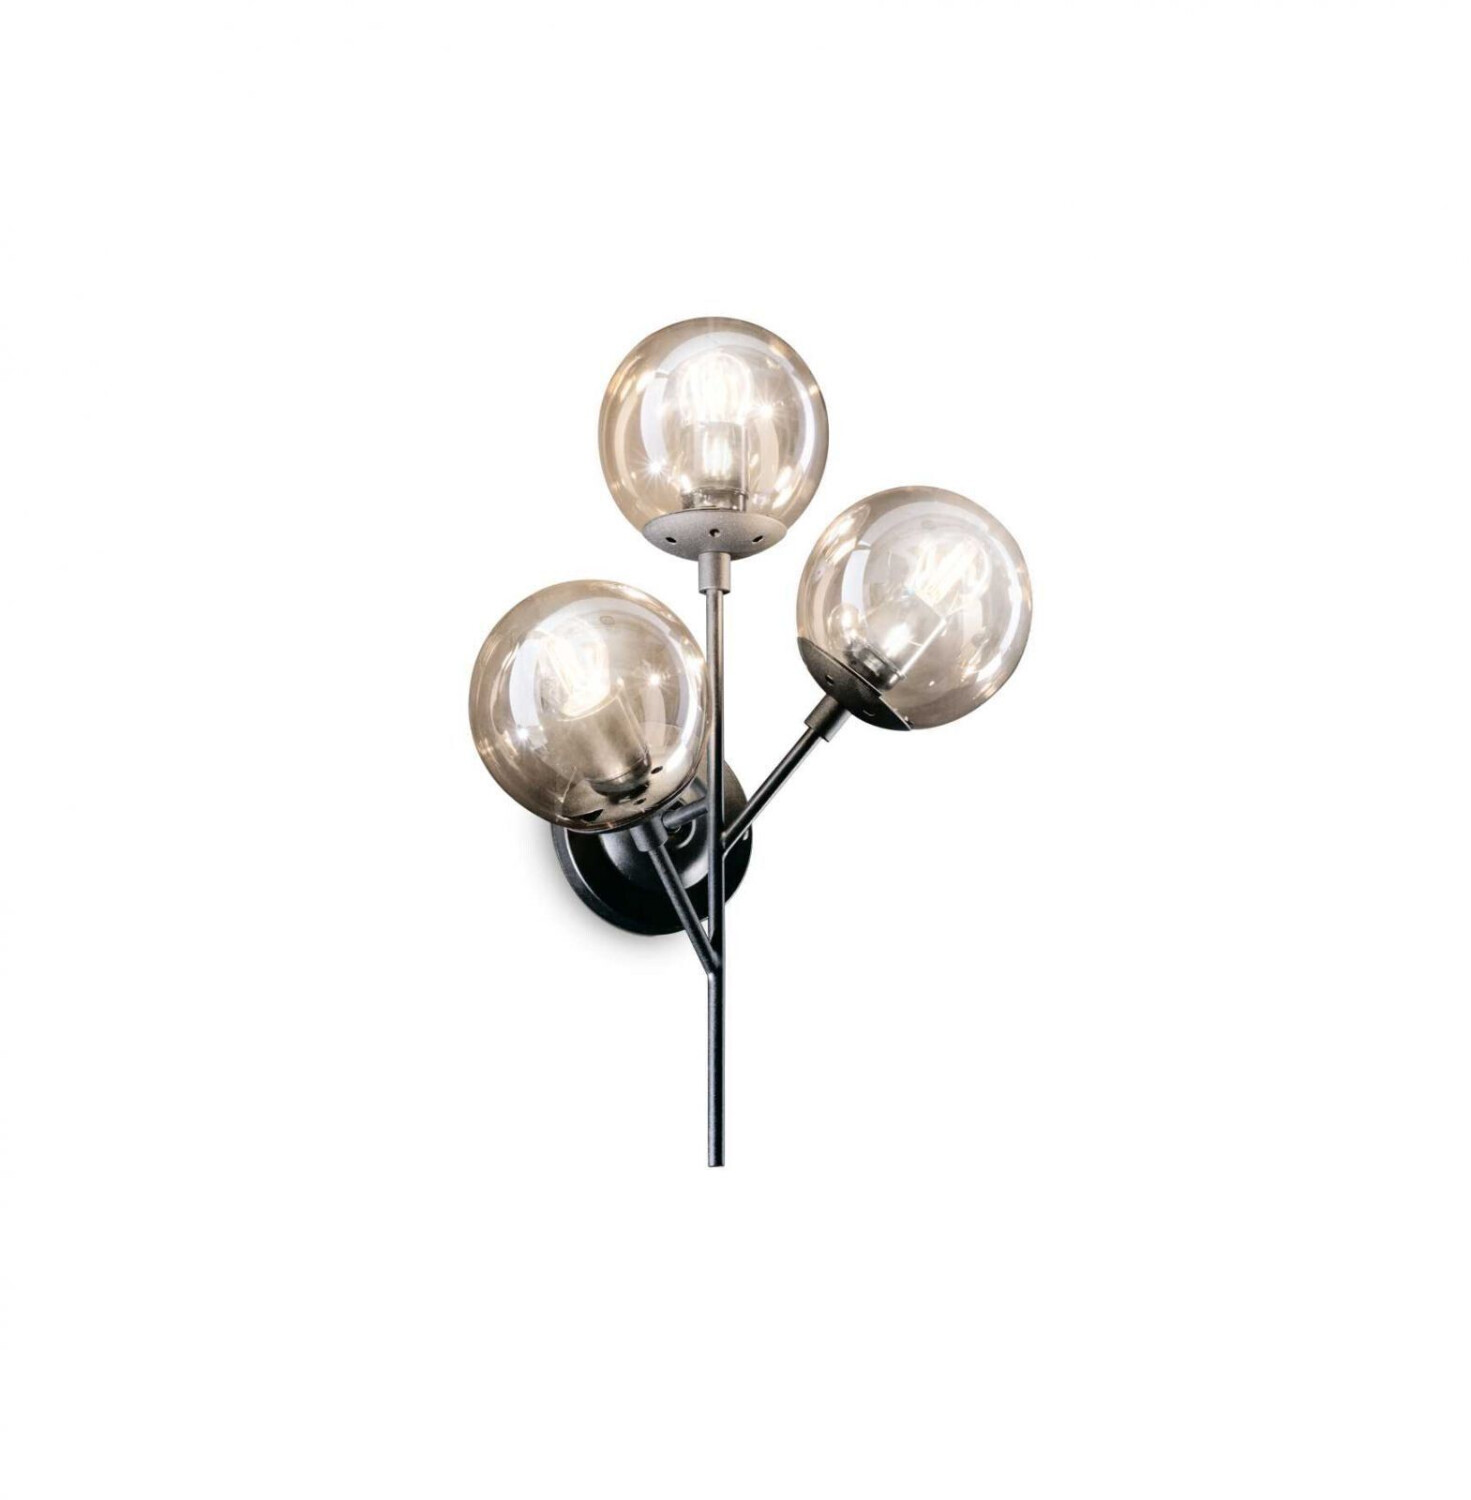 Photos - Chandelier / Lamp Ideal Lux KEPLER wall light E27 3-way dimmable black 187006 